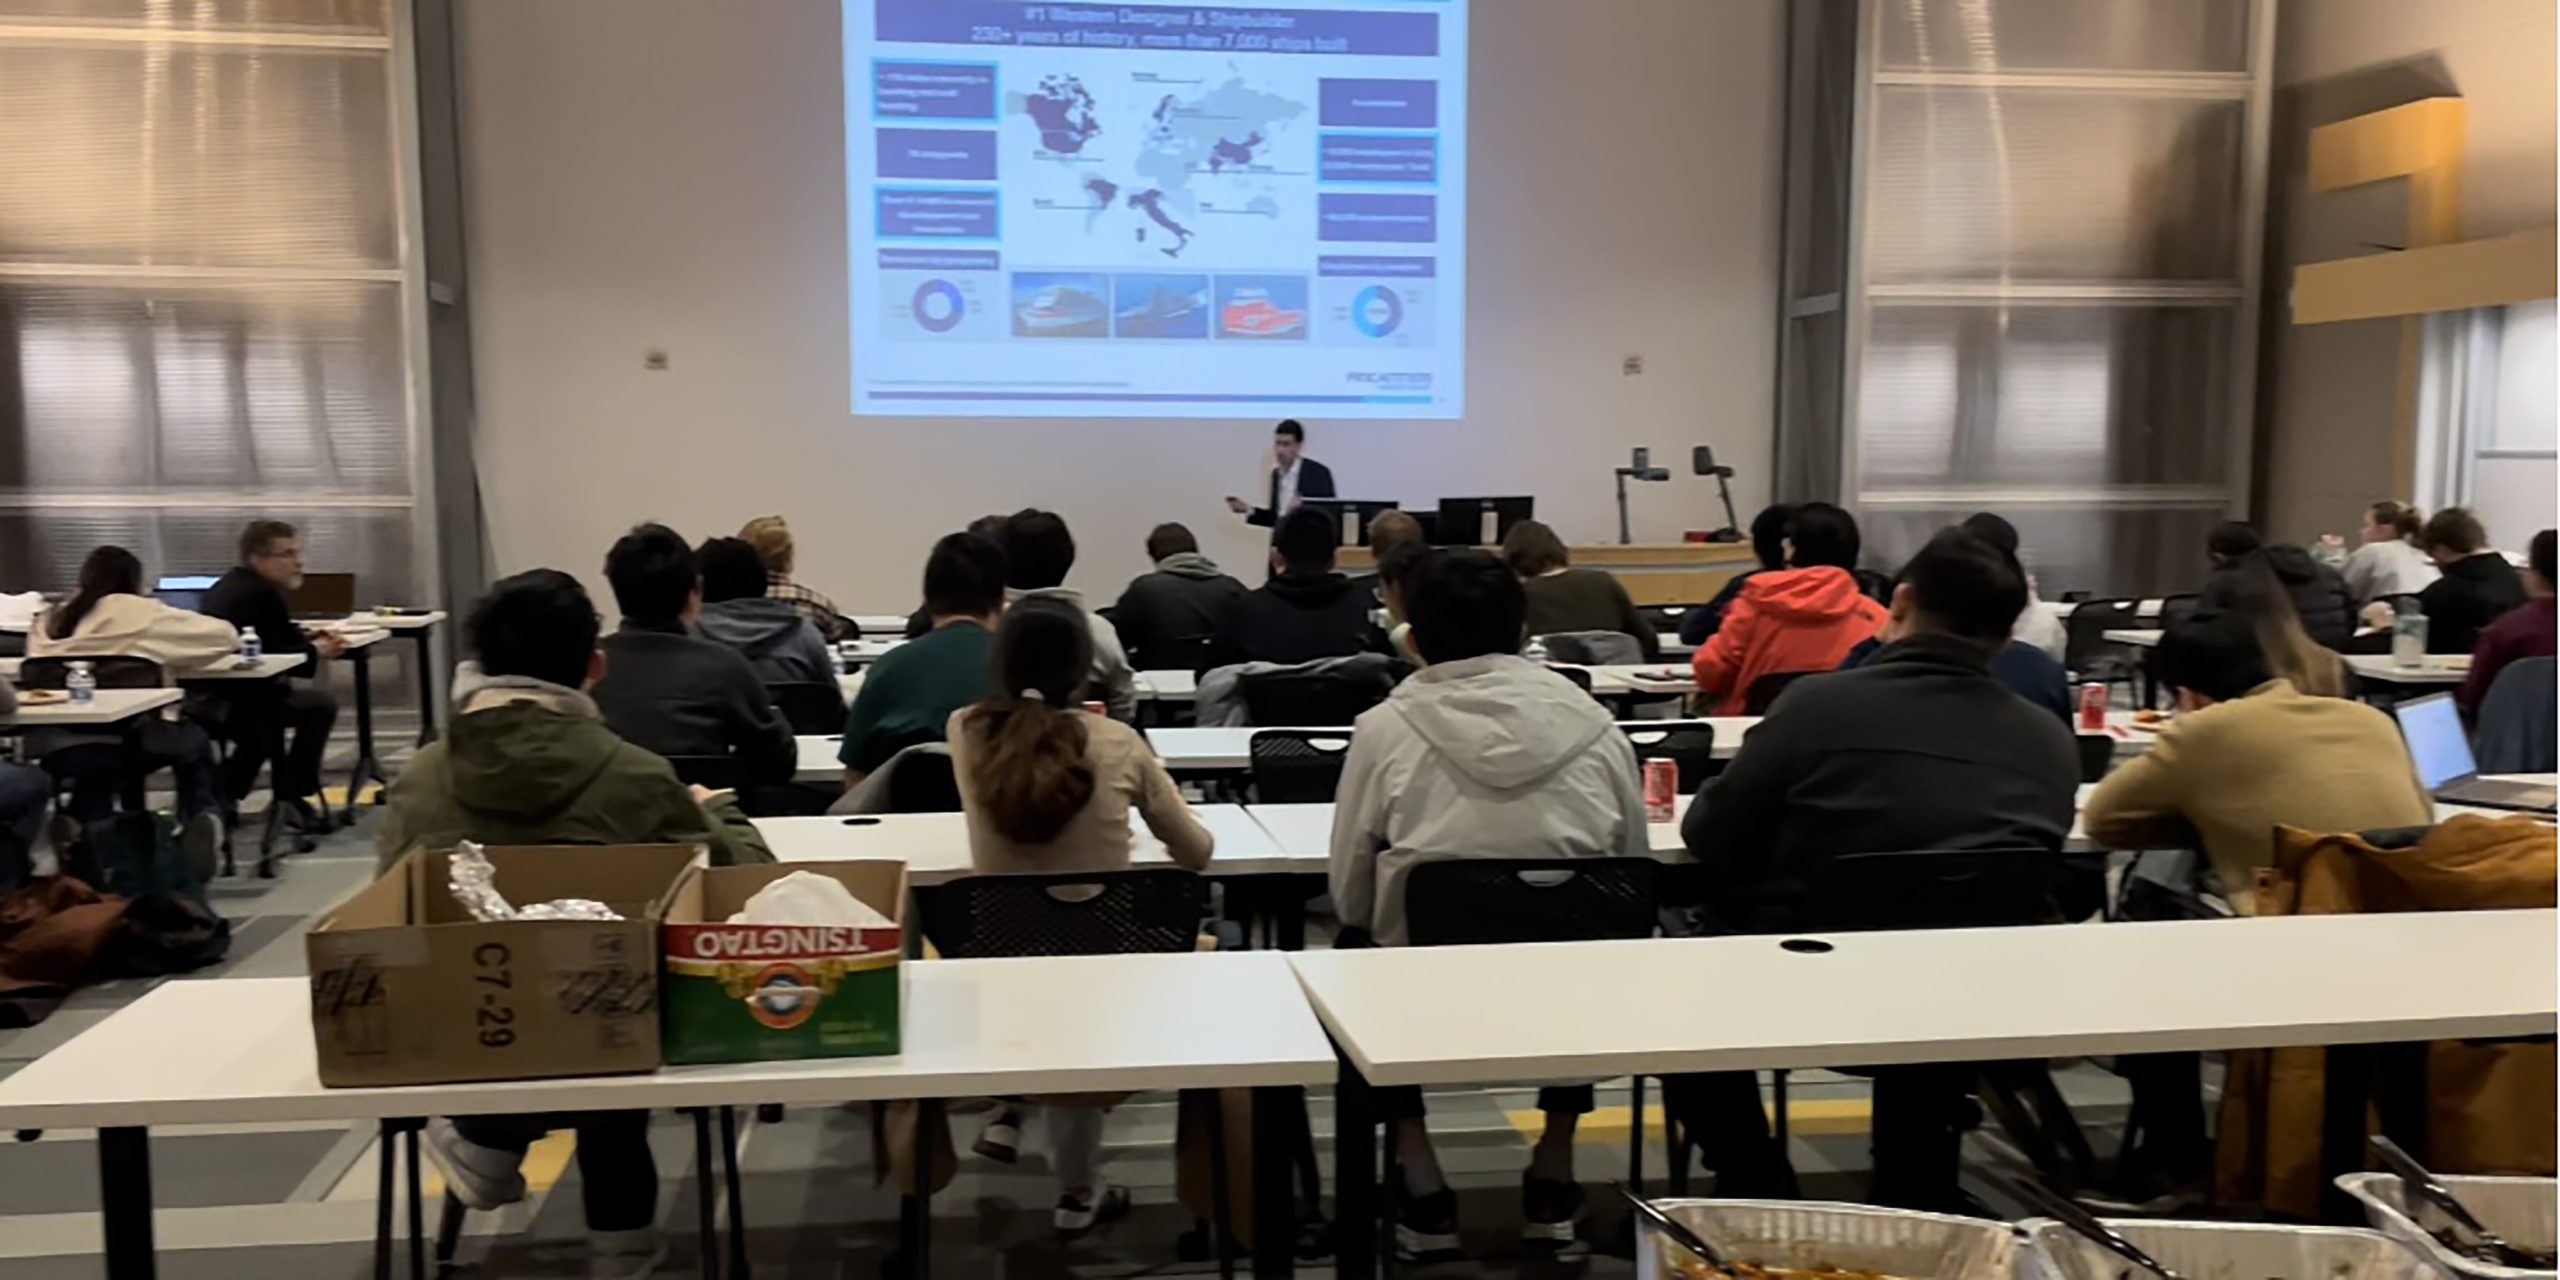 Dr. Librandi presented the AIMC Lunch series seminar during his April visit. In his role at Fincantieri Marine Group, Dr. Librandi oversees relationships with universities to incorporate the latest research in shipbuilding technologies. Photo by AMIC.